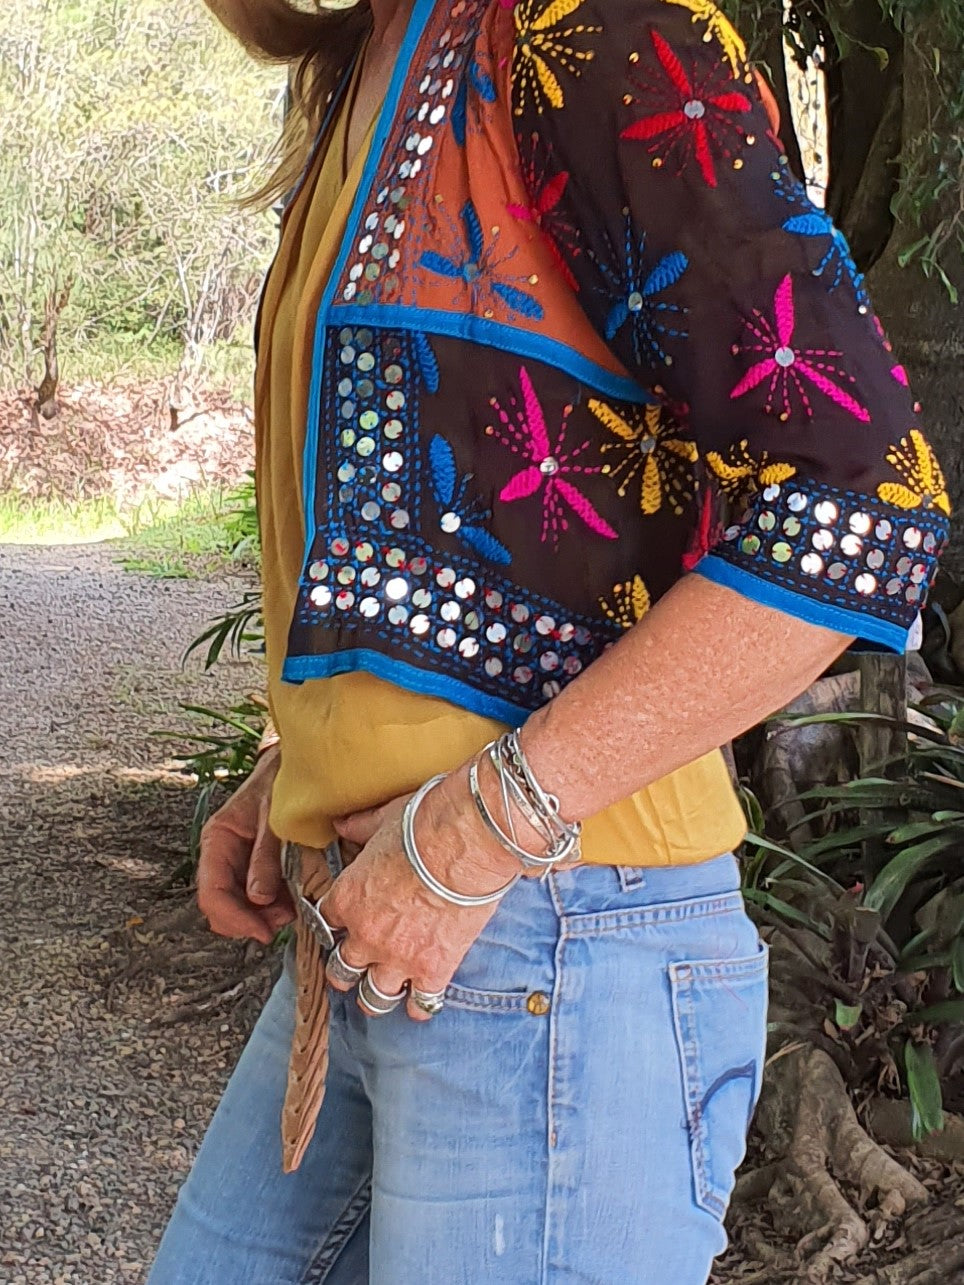 Side view of lady standing in a bohemian outfit of jeans, boots, belt and a sequinned jacket